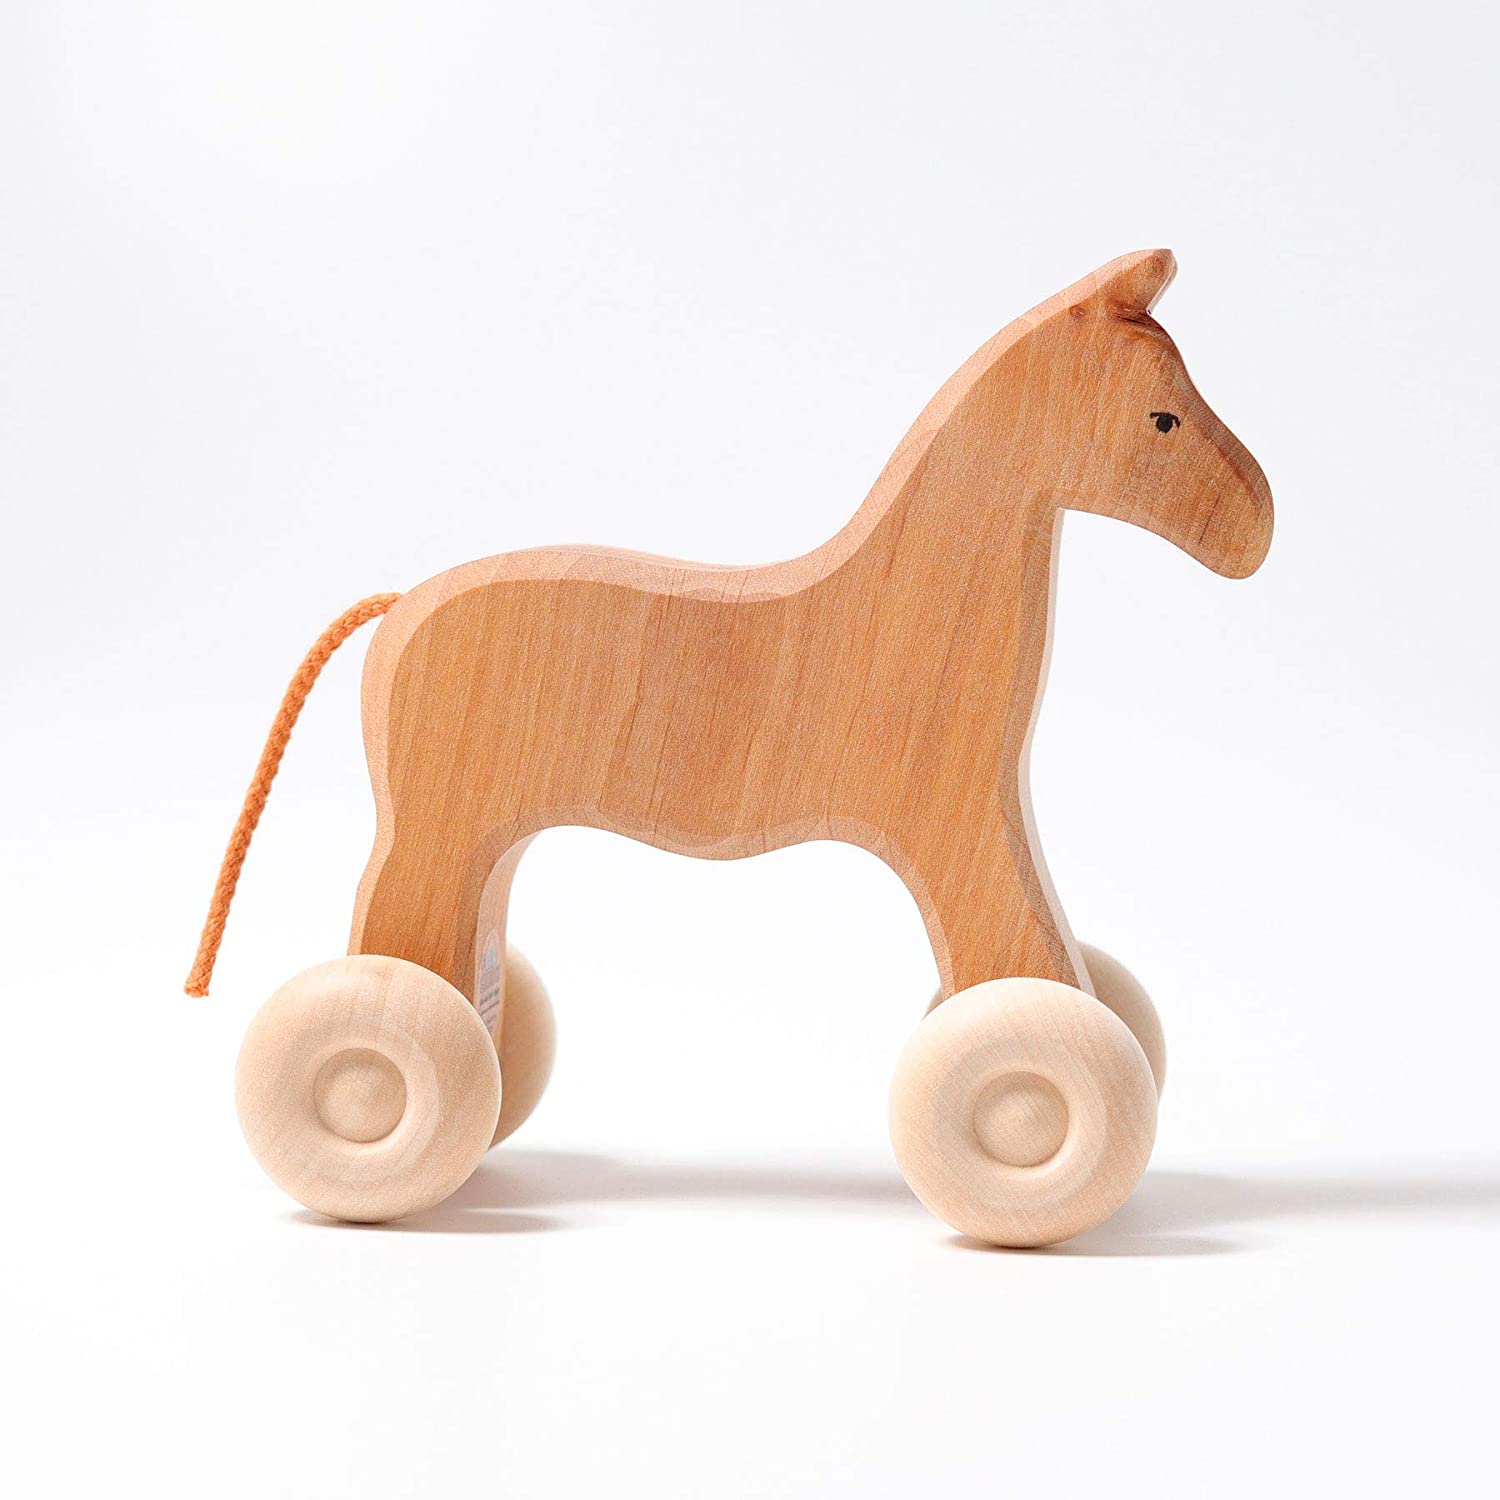 Grimm's Natural Horse Wooden Pony ‘Filou’ Push Toy Baby Vehicle Handmade Germany 